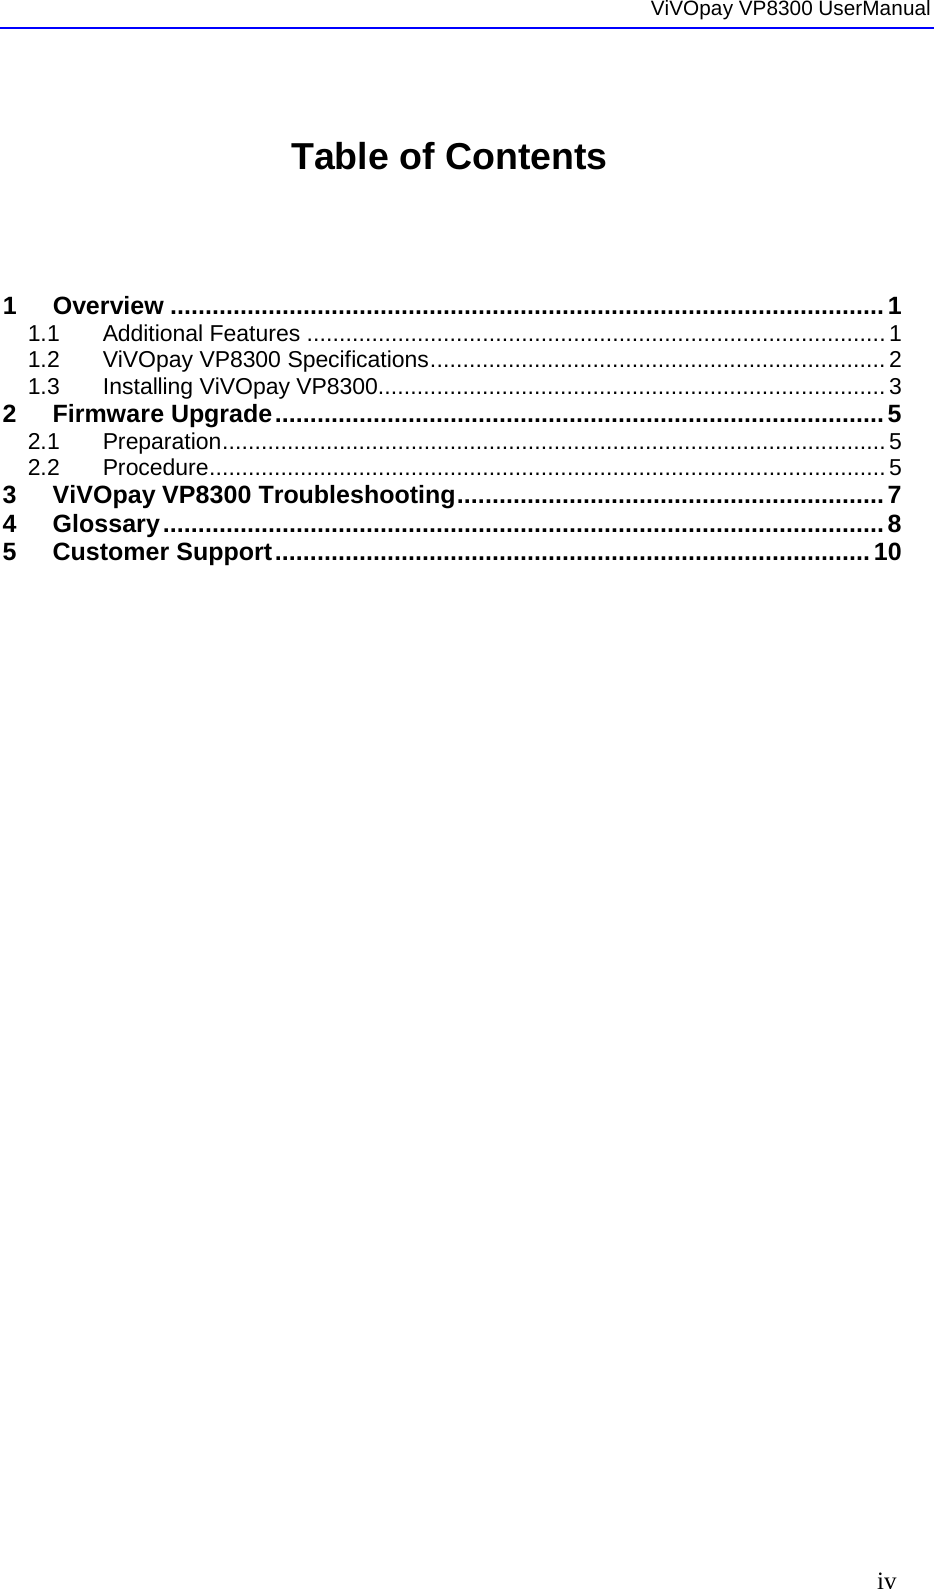  ViVOpay VP8300 UserManual     iv  Table of Contents     1 Overview ...................................................................................................... 1 1.1 Additional Features ......................................................................................... 1 1.2 ViVOpay VP8300 Specifications ...................................................................... 2 1.3 Installing ViVOpay VP8300.............................................................................. 3 2 Firmware Upgrade ....................................................................................... 5 2.1 Preparation ...................................................................................................... 5 2.2 Procedure ........................................................................................................ 5 3 ViVOpay VP8300 Troubleshooting ............................................................. 7 4 Glossary ....................................................................................................... 8 5 Customer Support ..................................................................................... 10  